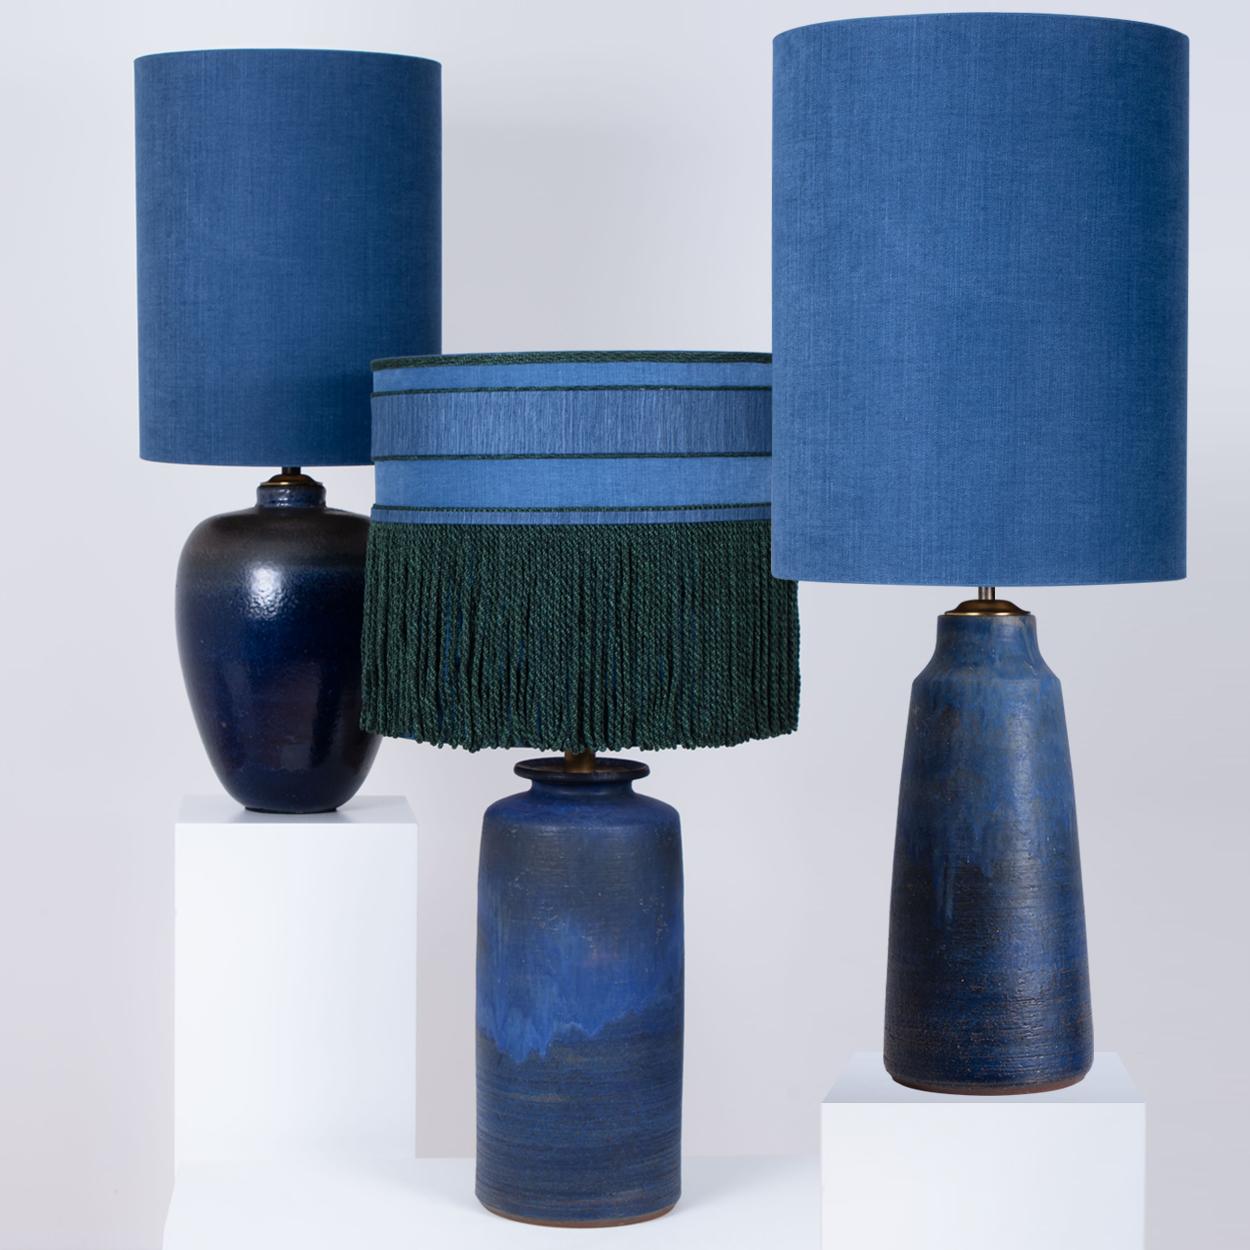 A set of 3 high-end ceramic table lamps, Denmark, 1960s. Sculptural pieces made of handmade ceramic in rich blue/grey tones, with a combination of dry and glazed finishes. With special new custom made blue silk lamp shades by René Houben. With warm